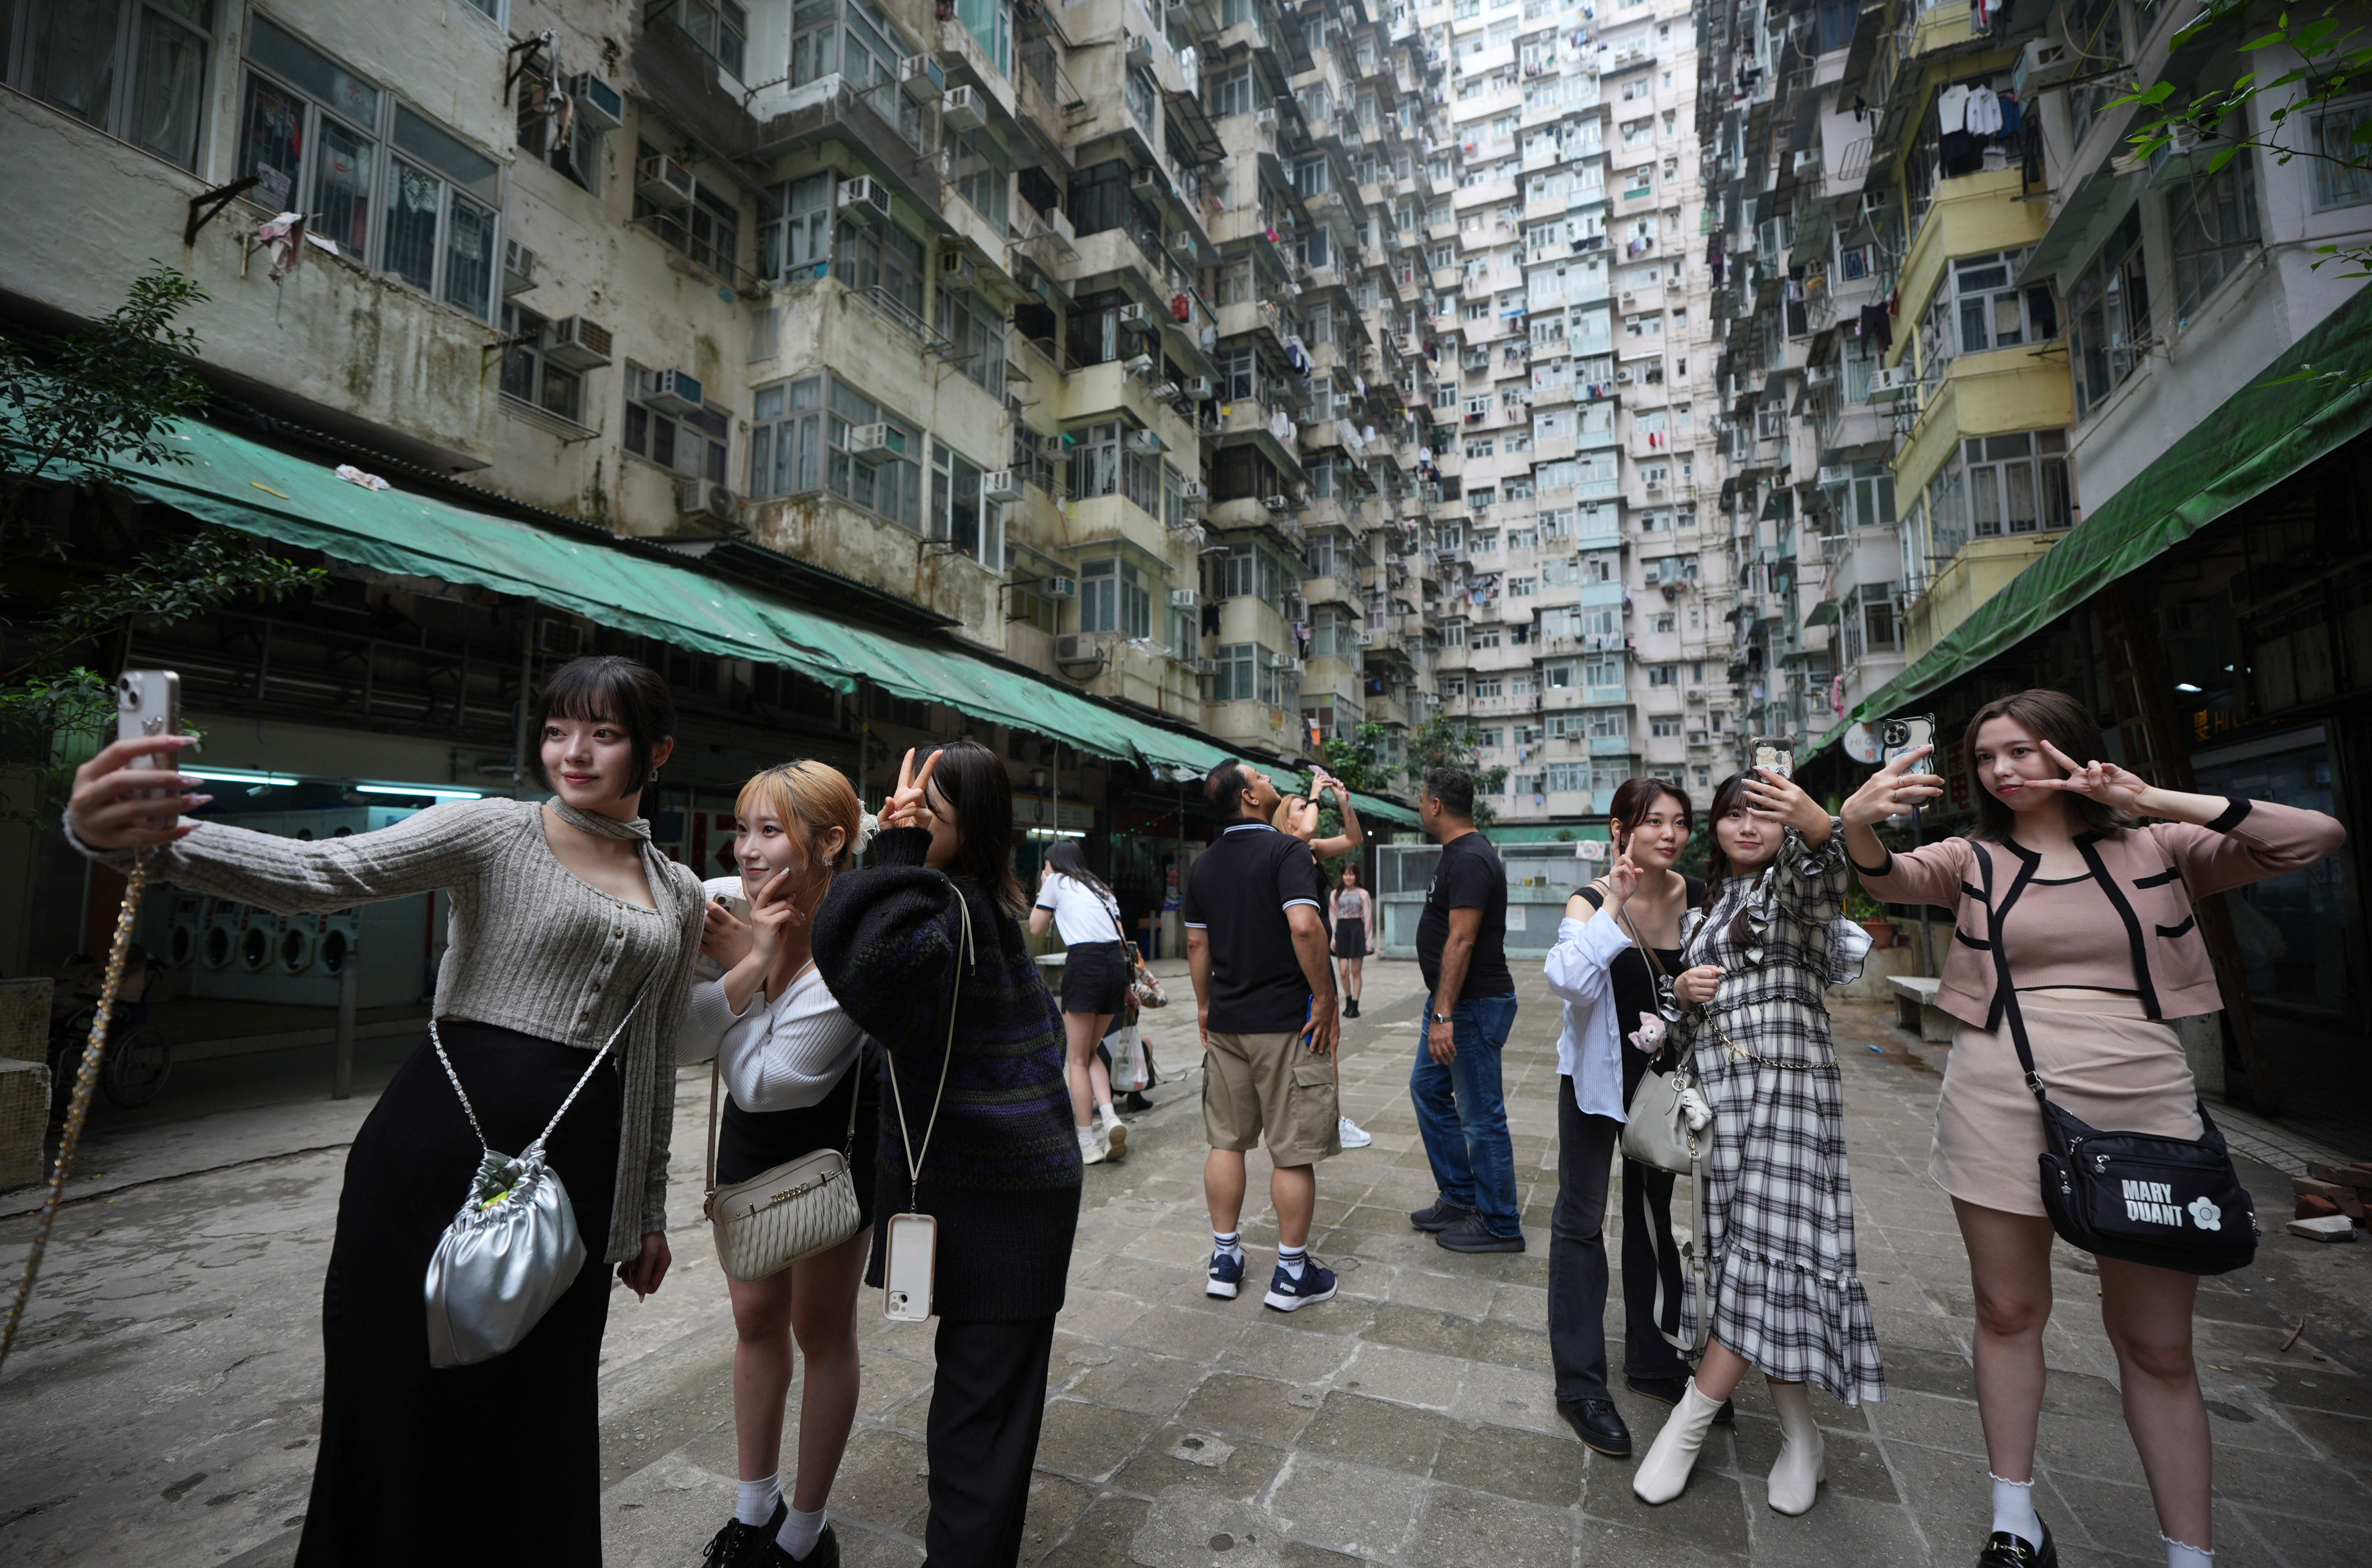 Tourists take pictures near the Yick Cheong Building, also known as the “Monster Building”, in Quarry Bay, Hong Kong. Photo: Eugene Lee